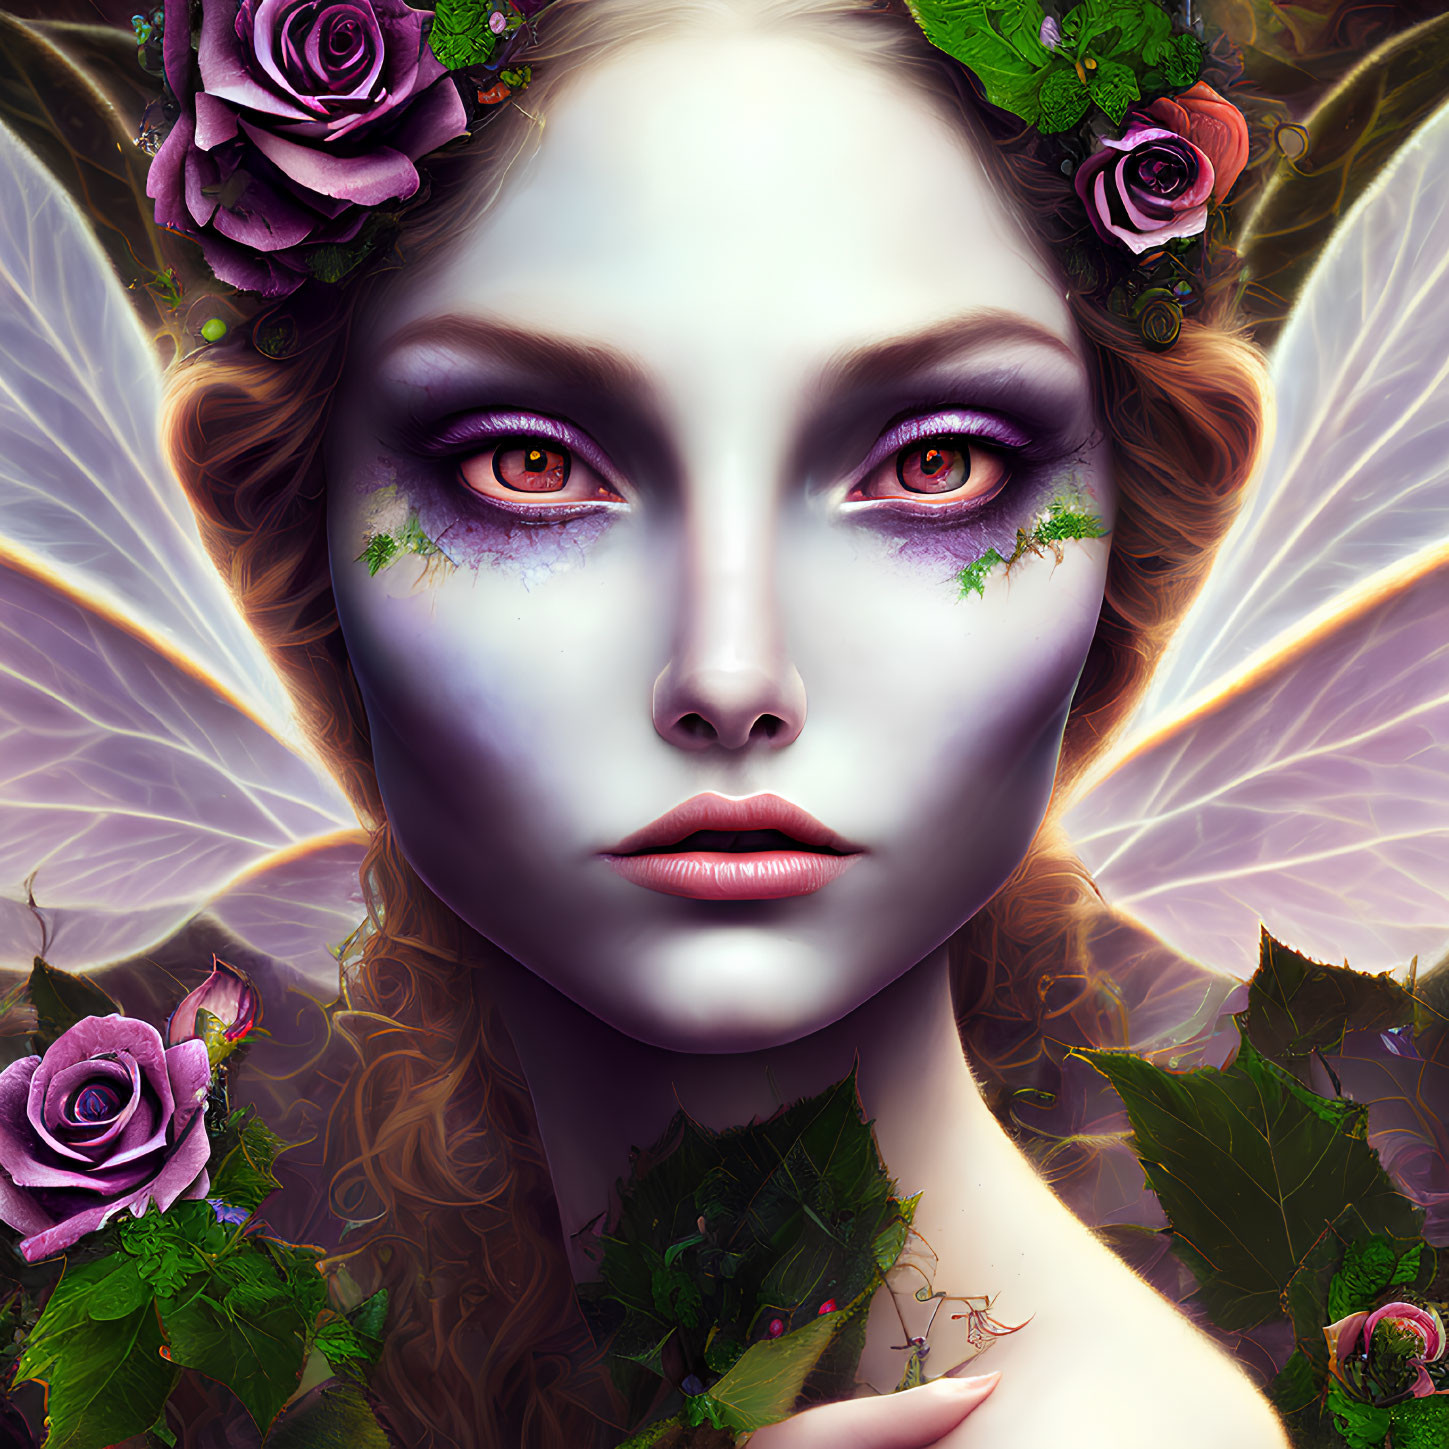 Digital artwork: Woman with purple eyes, floral crown, translucent wings, in purple and green foliage